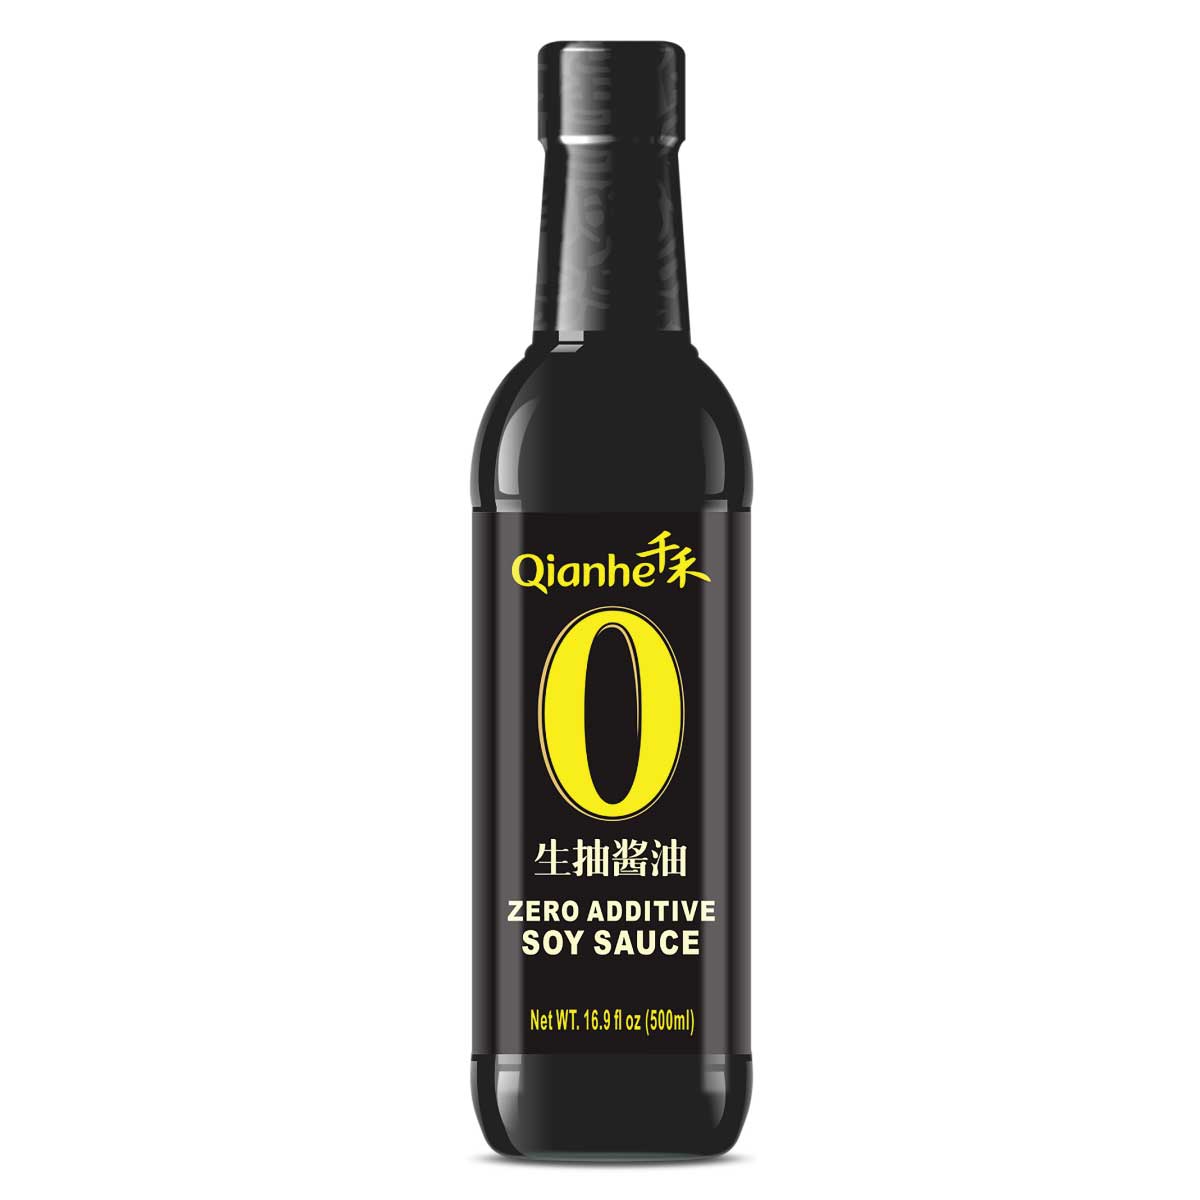 Qianhe-Zero-Additives-Soy-Sauce-500ml